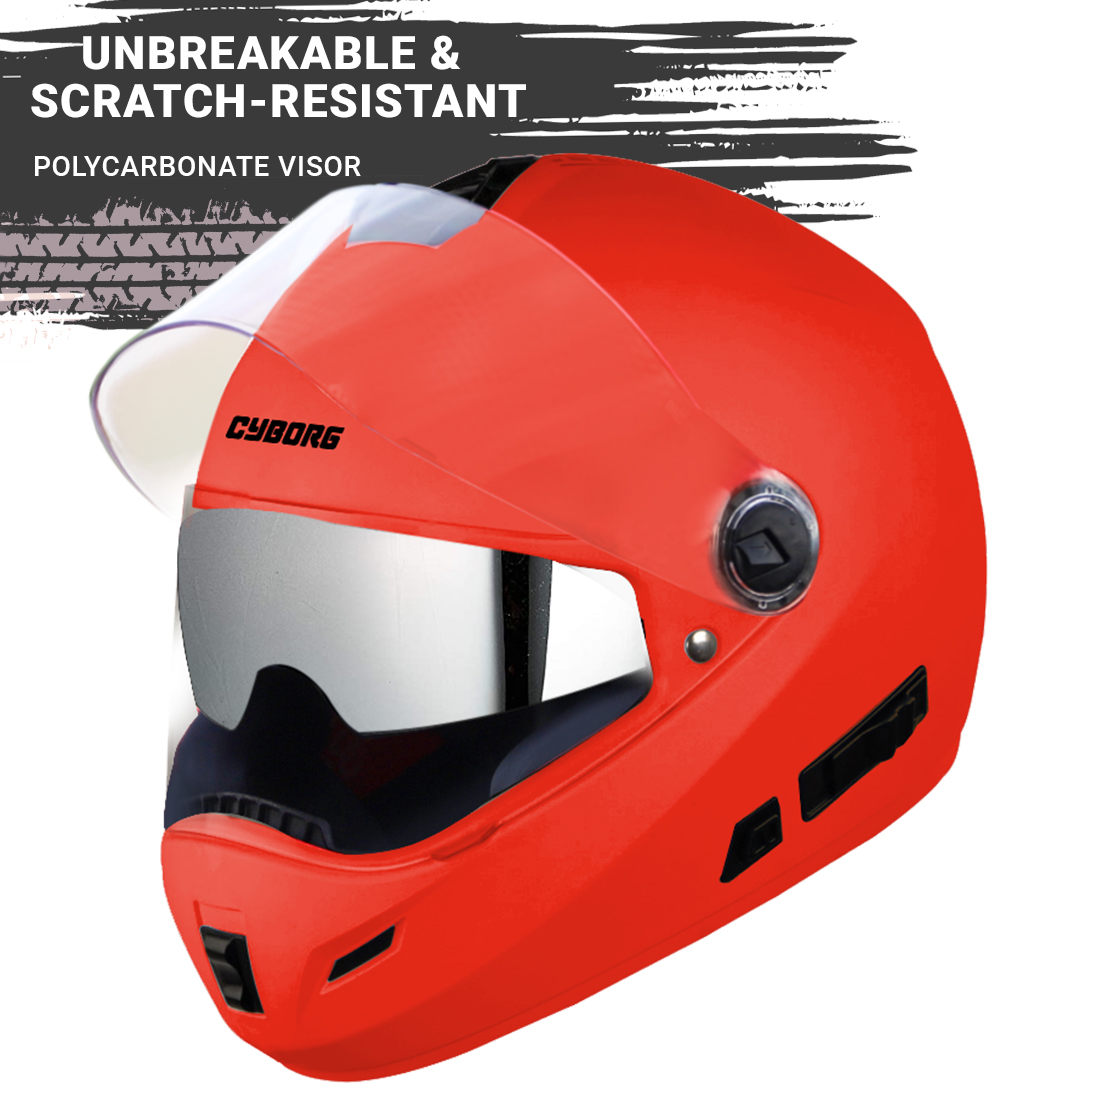 Steelbird SB-39 Cyborg ISI Certified Full Face Helmet For Men And Women With Sun Shield (Glossy Fluo Red)